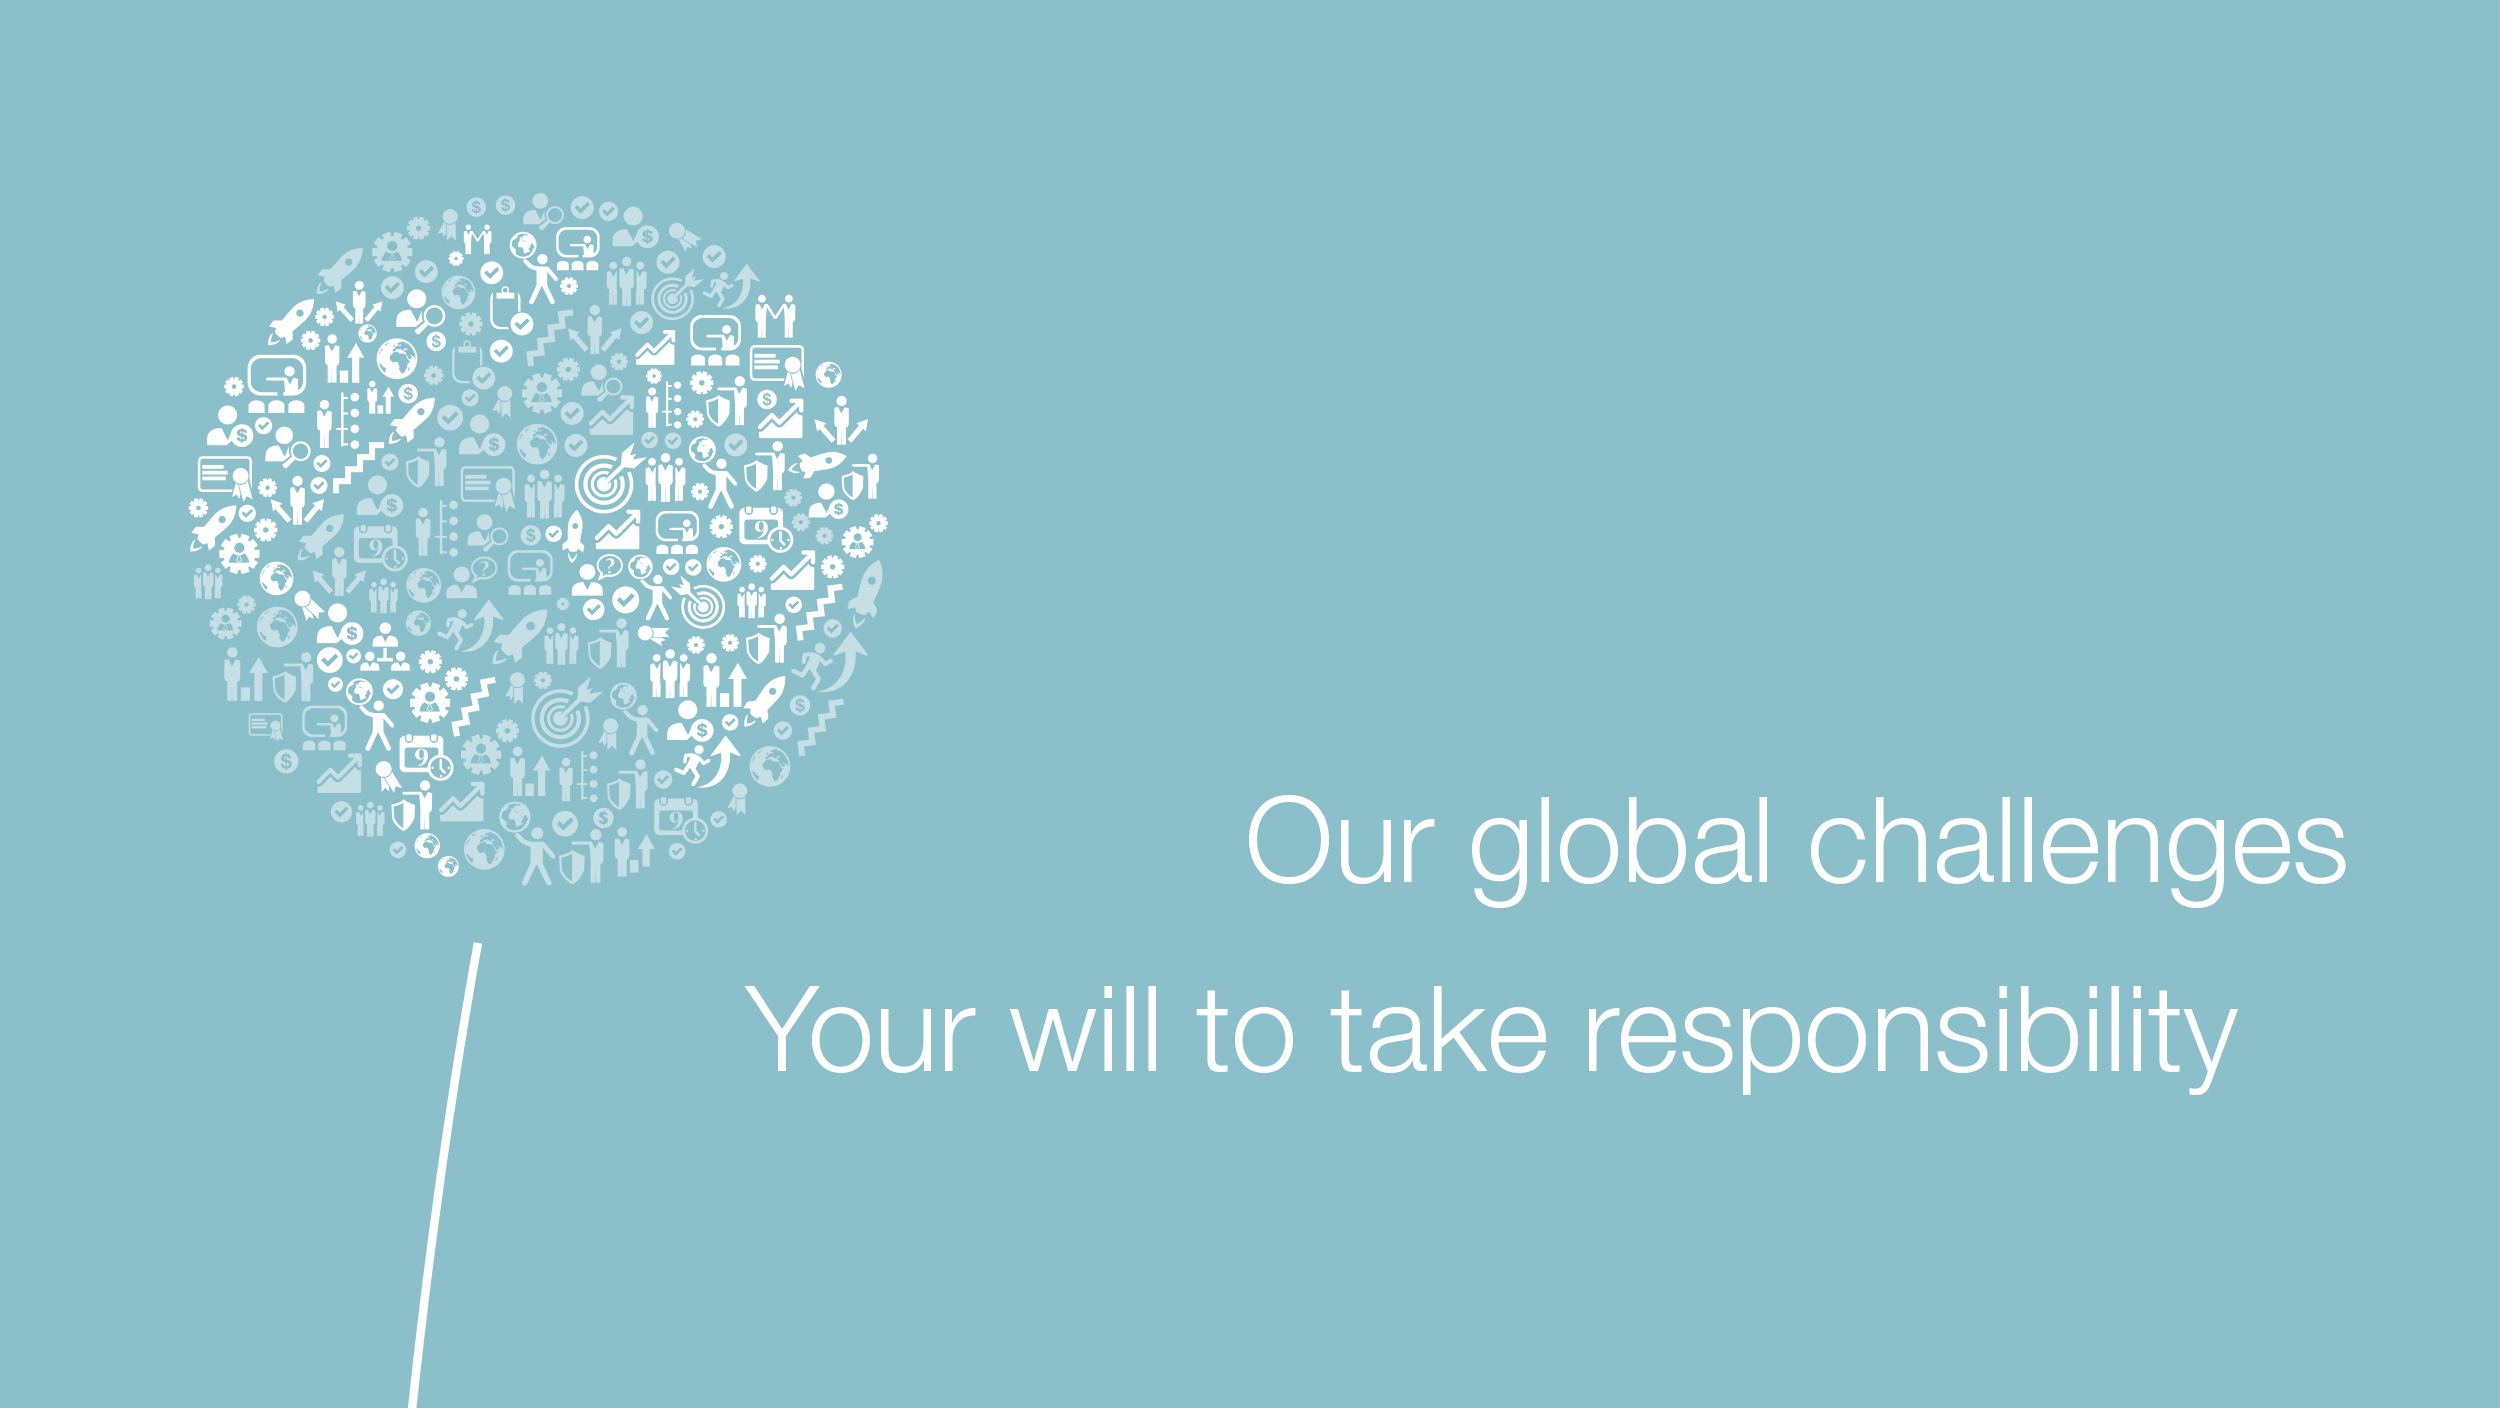 Pusteblume aus Icons als Weltkugel, daneben der Slogan: Our global challenges Your will to take responibility